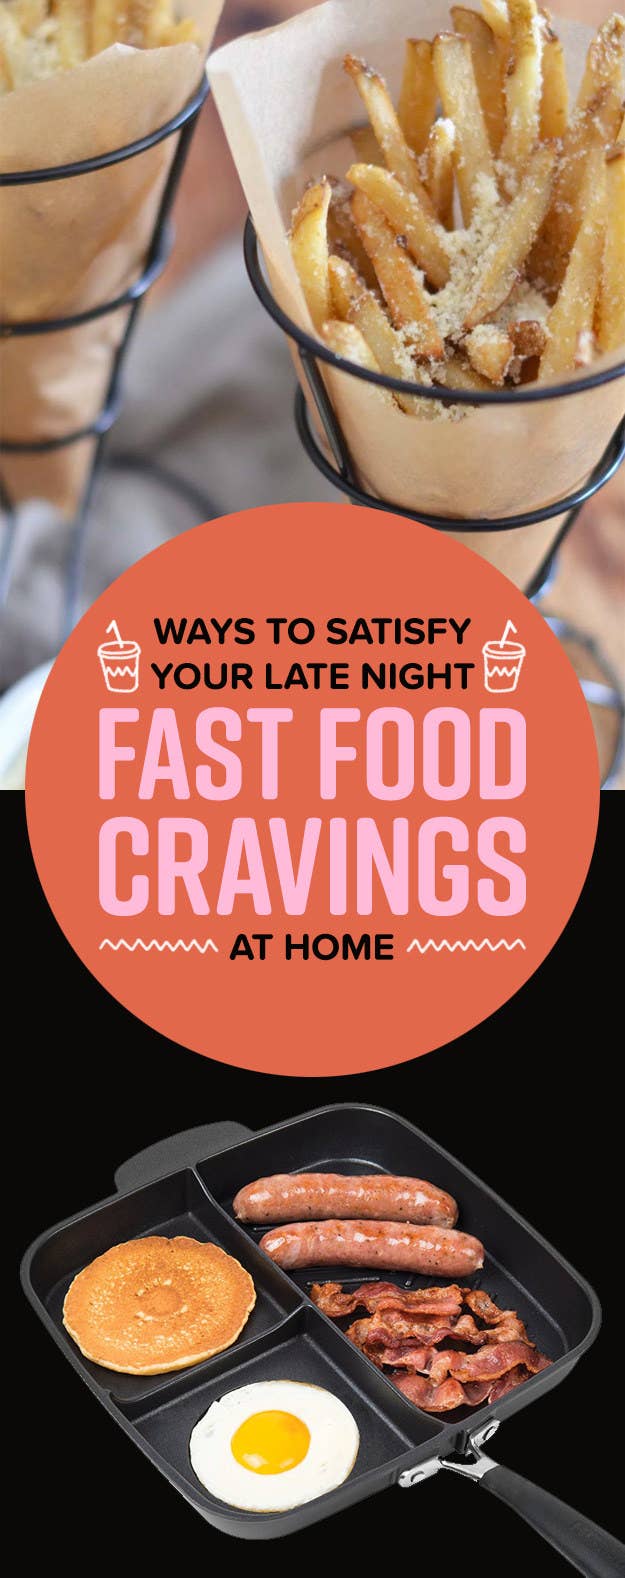 23 Ways To Satisfy Your Late Night Fast Food Cravings At Home